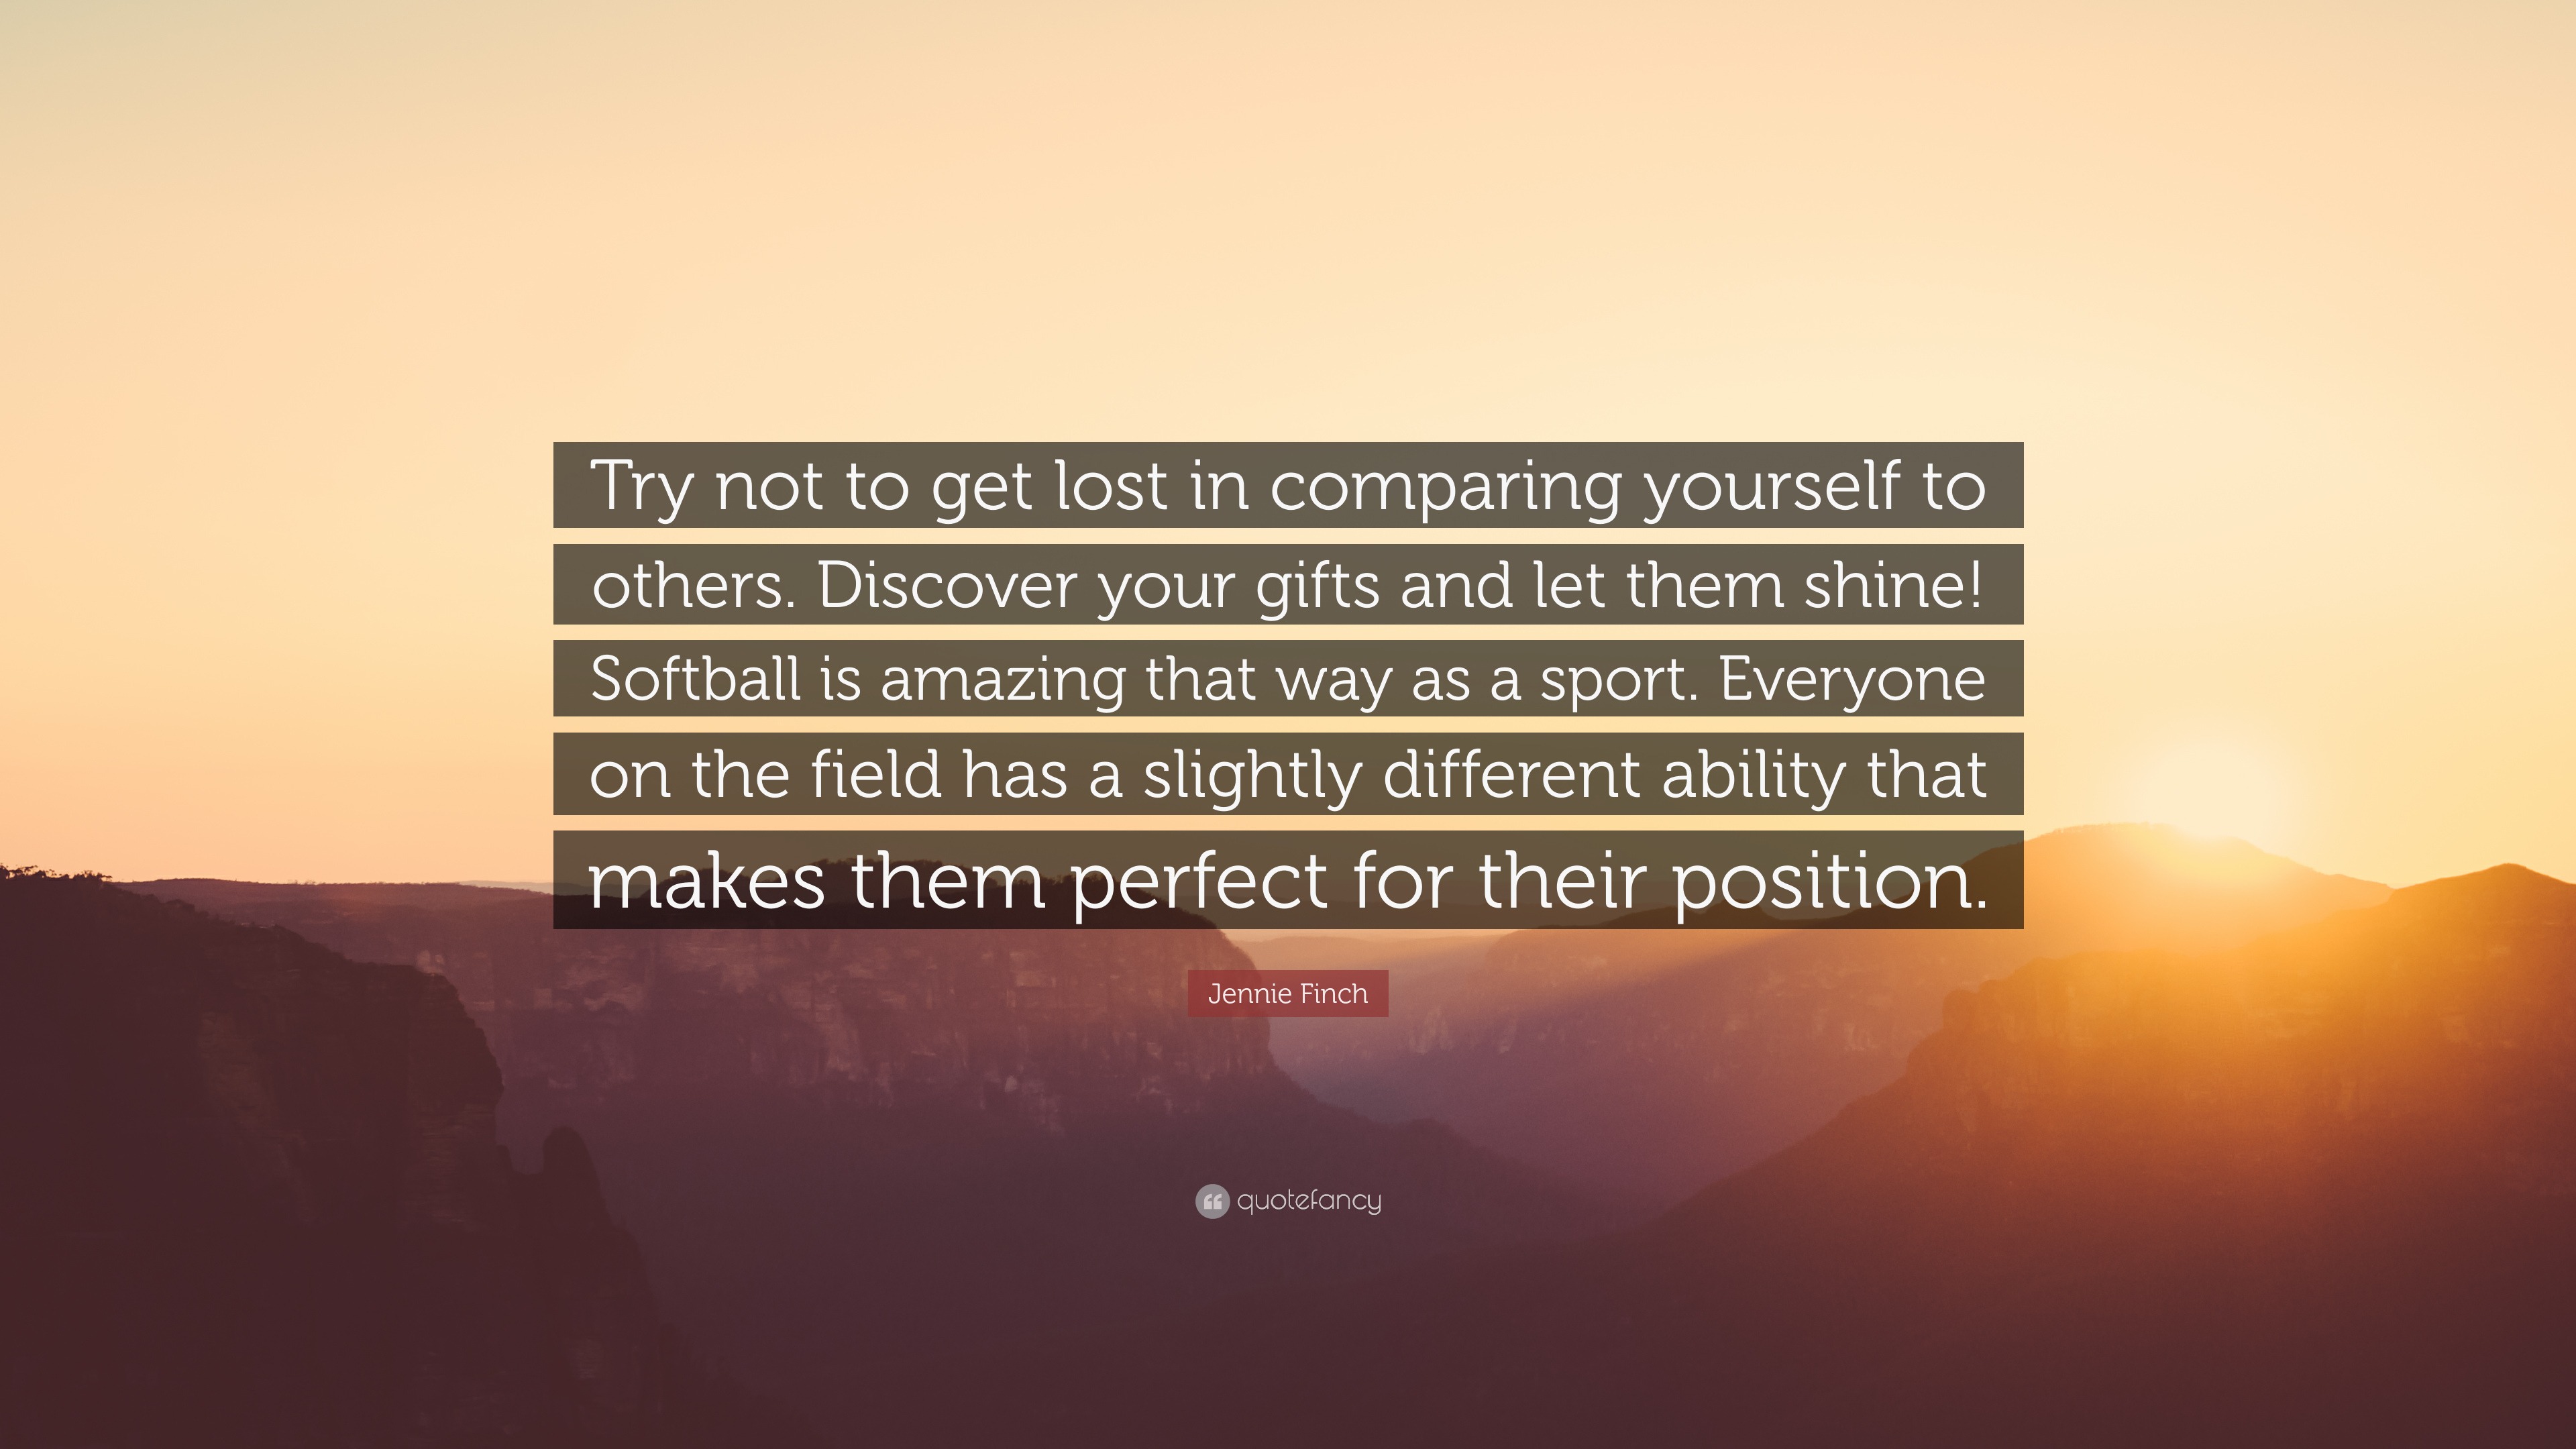 Jennie Finch Quote: “Try not to get lost in comparing yourself to